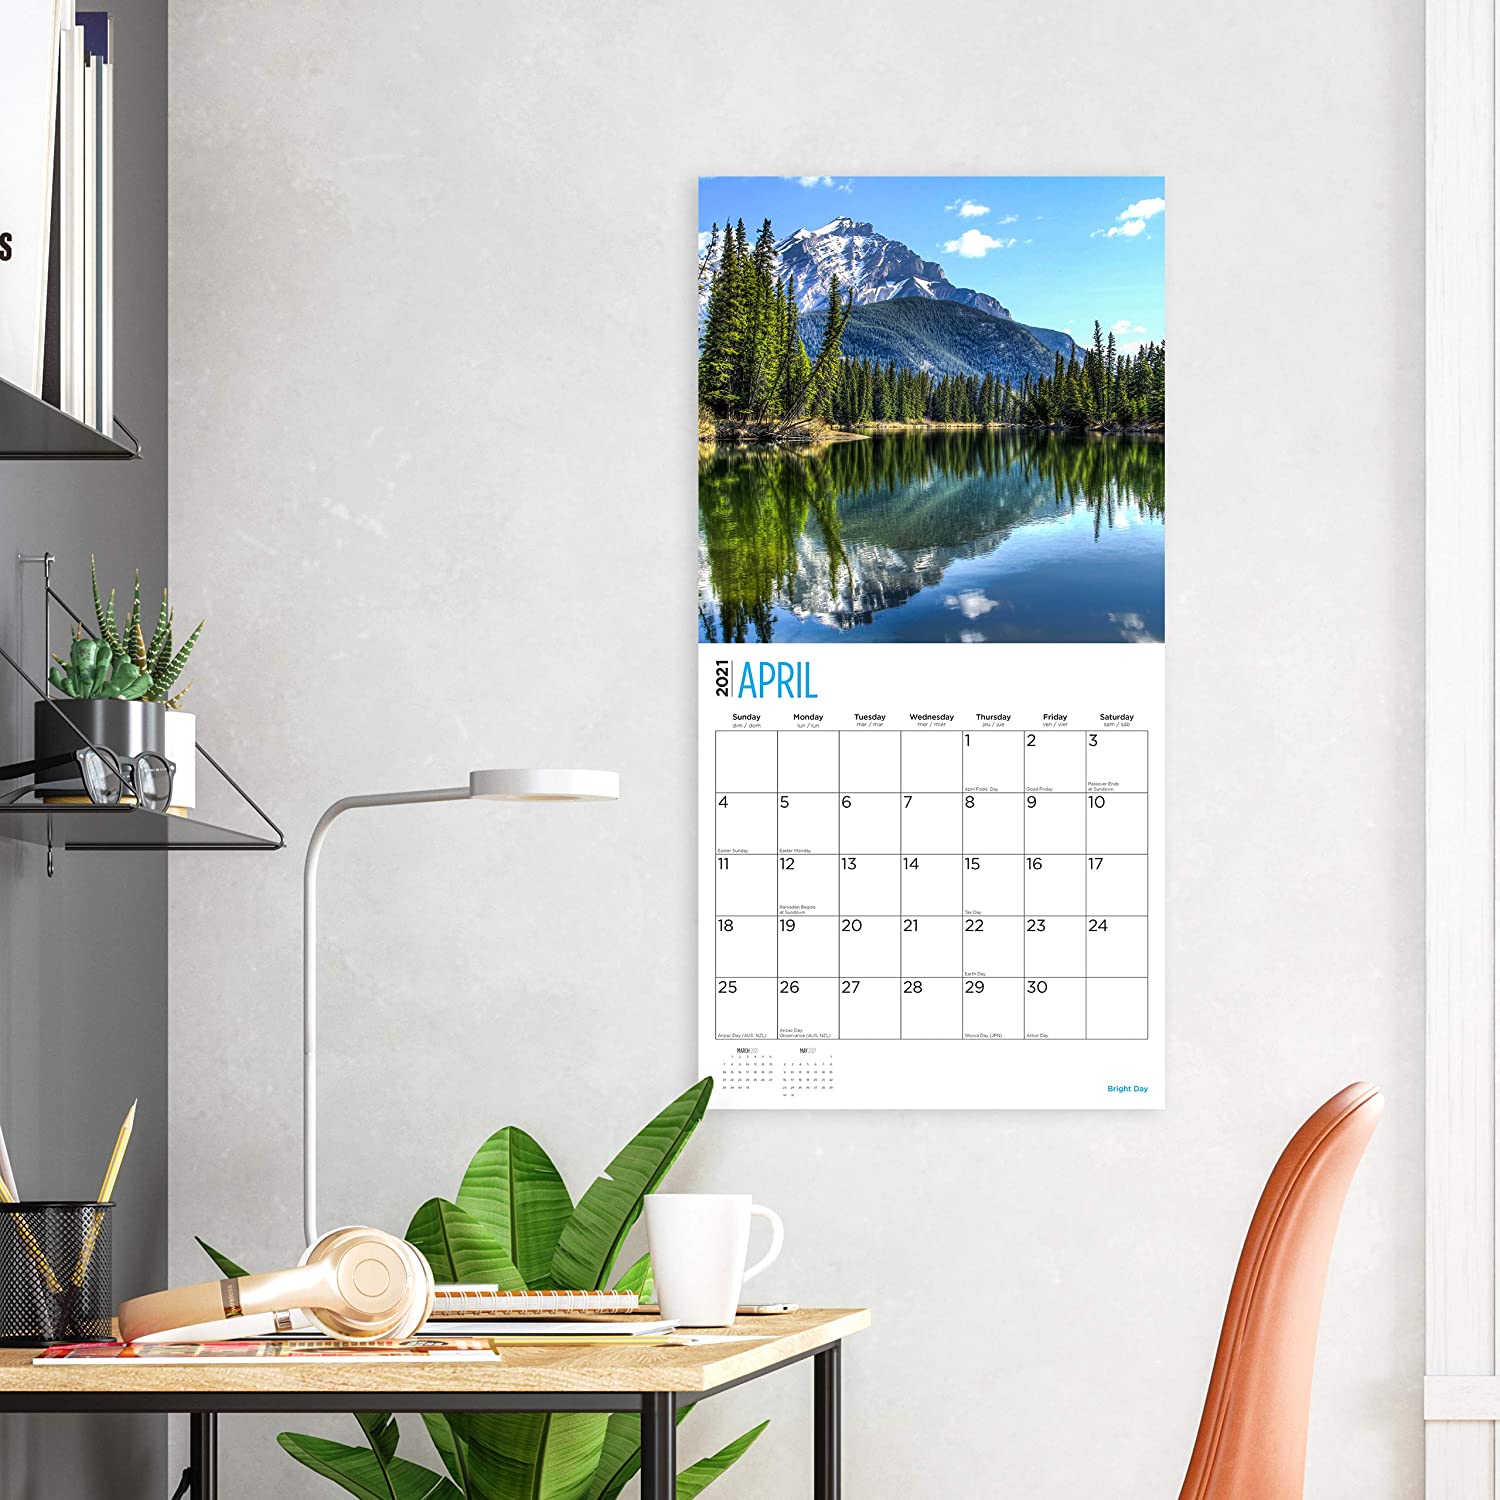 2021 Rocky Mountains Wall Calendar by Bright Day, 12 x 12 Inch